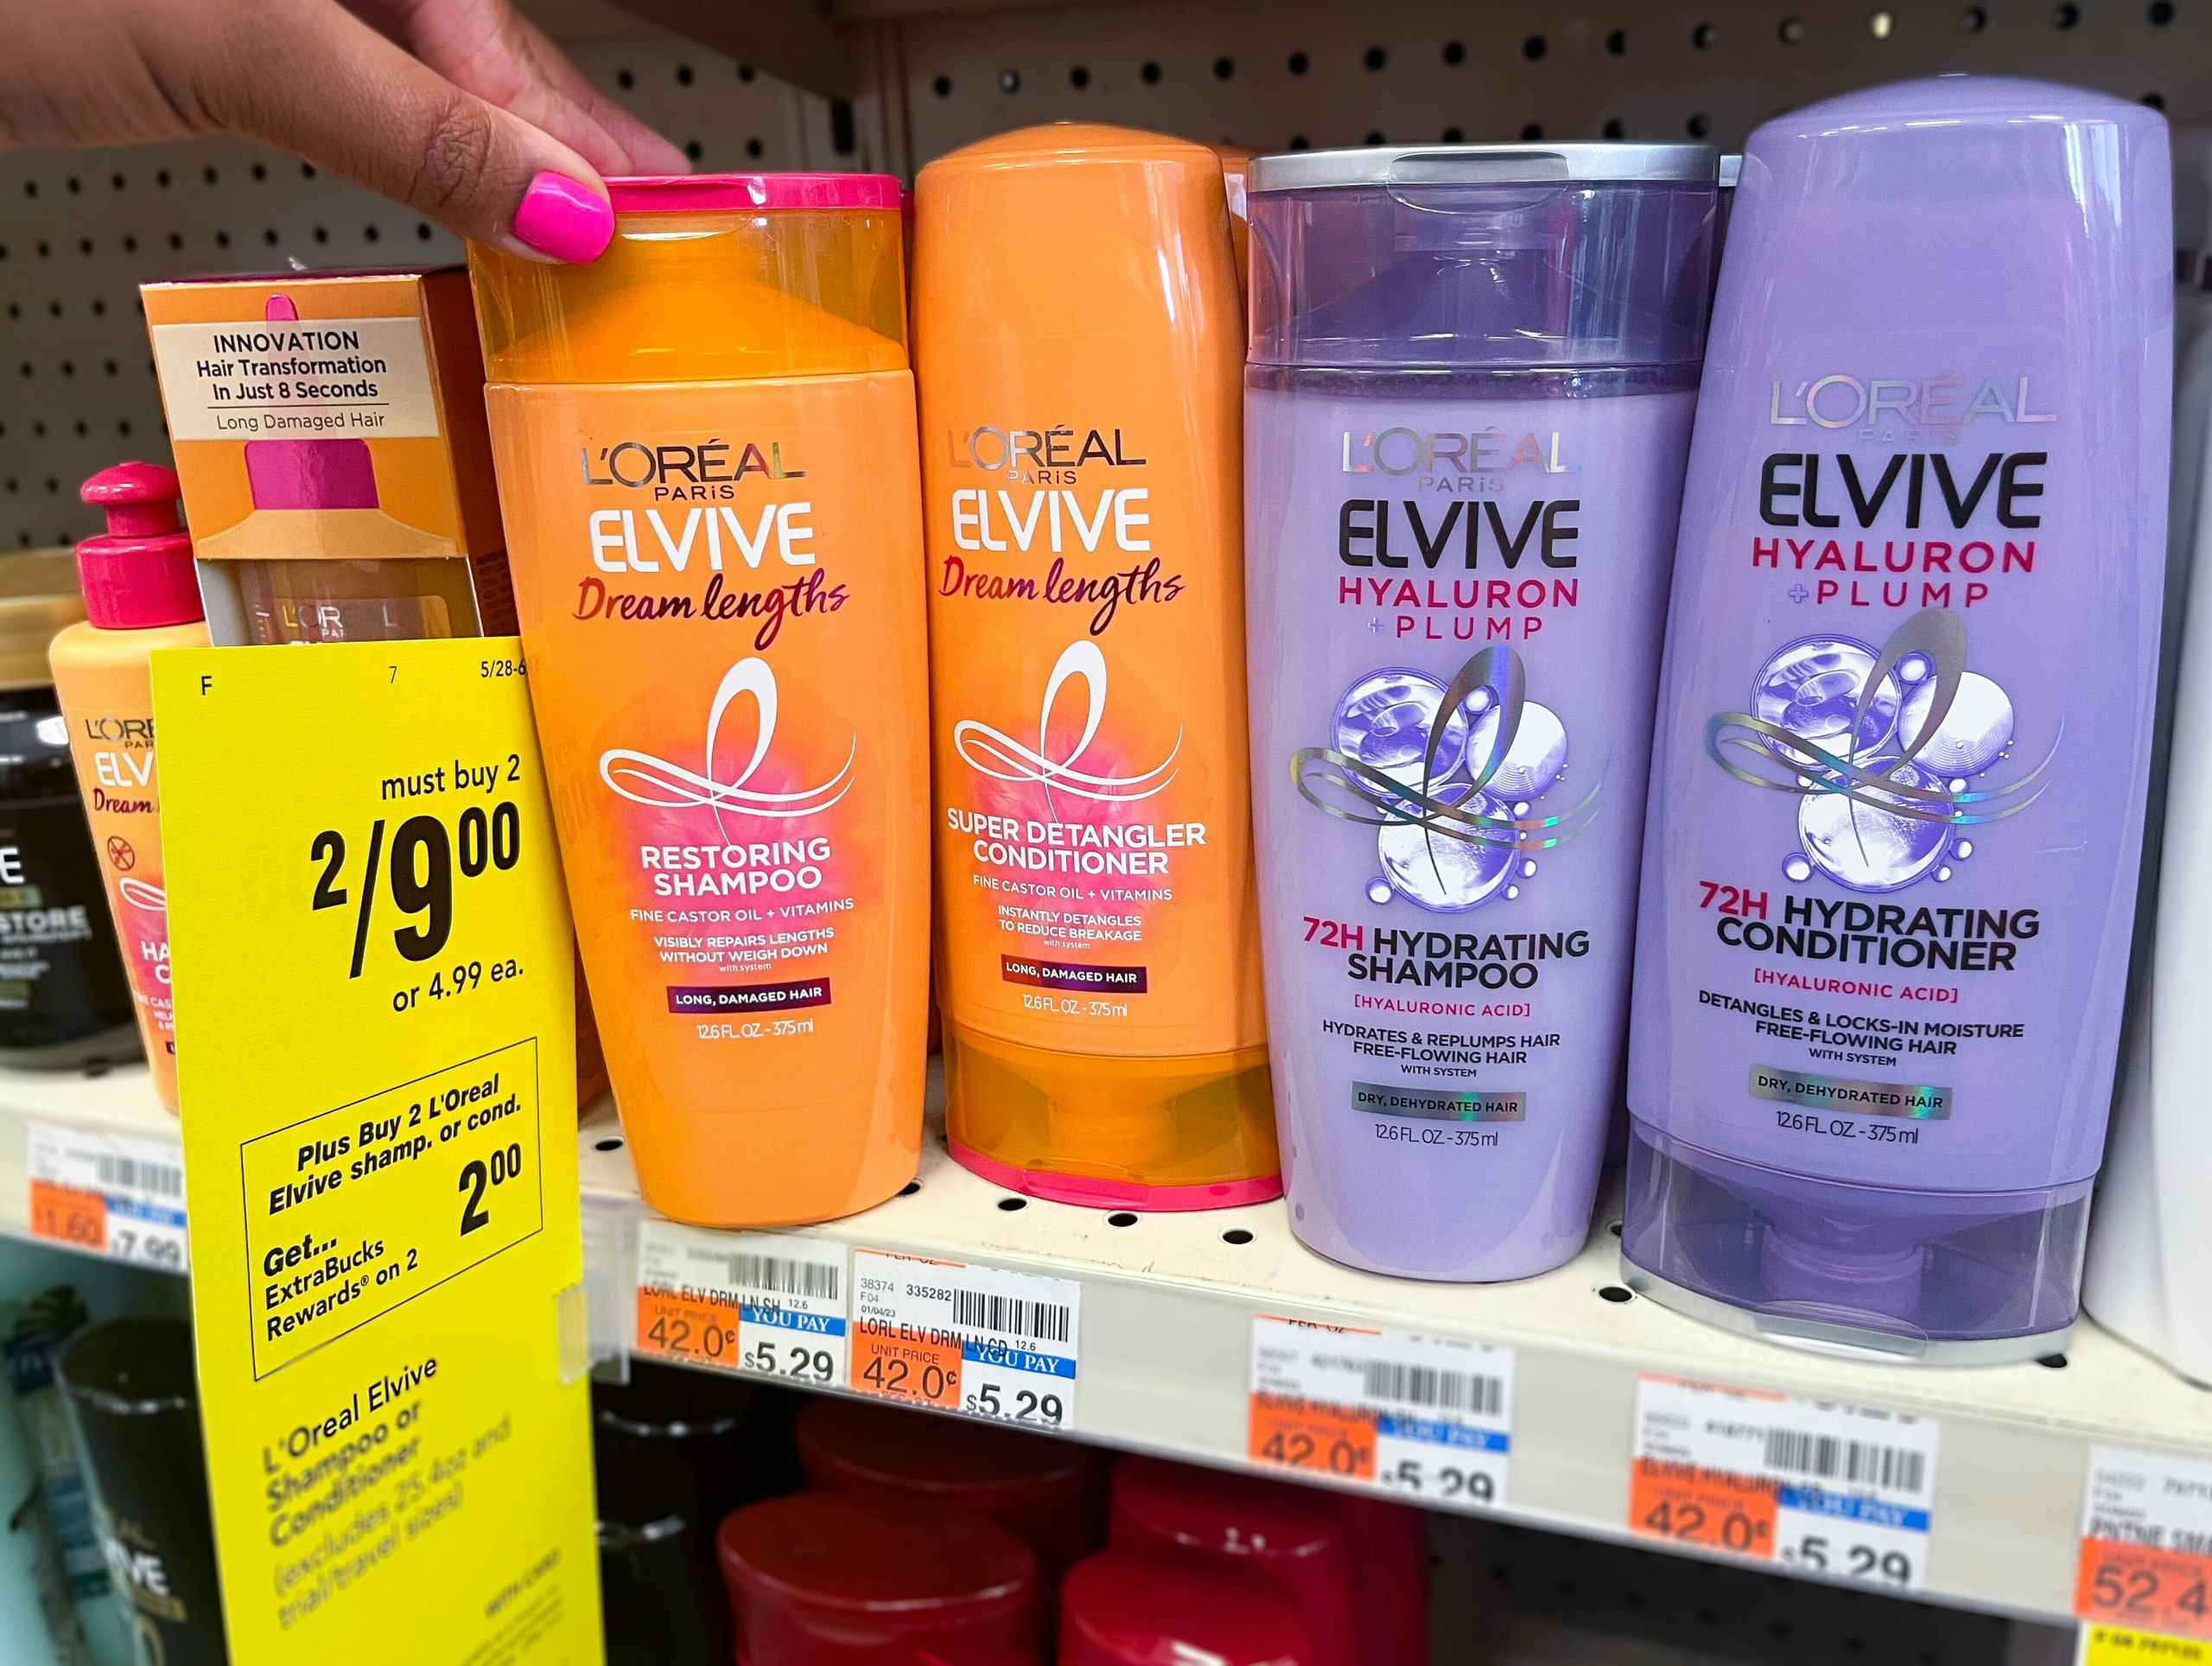 hand grabbing bottle of L'Oreal Elvive shampoo next to sales tag